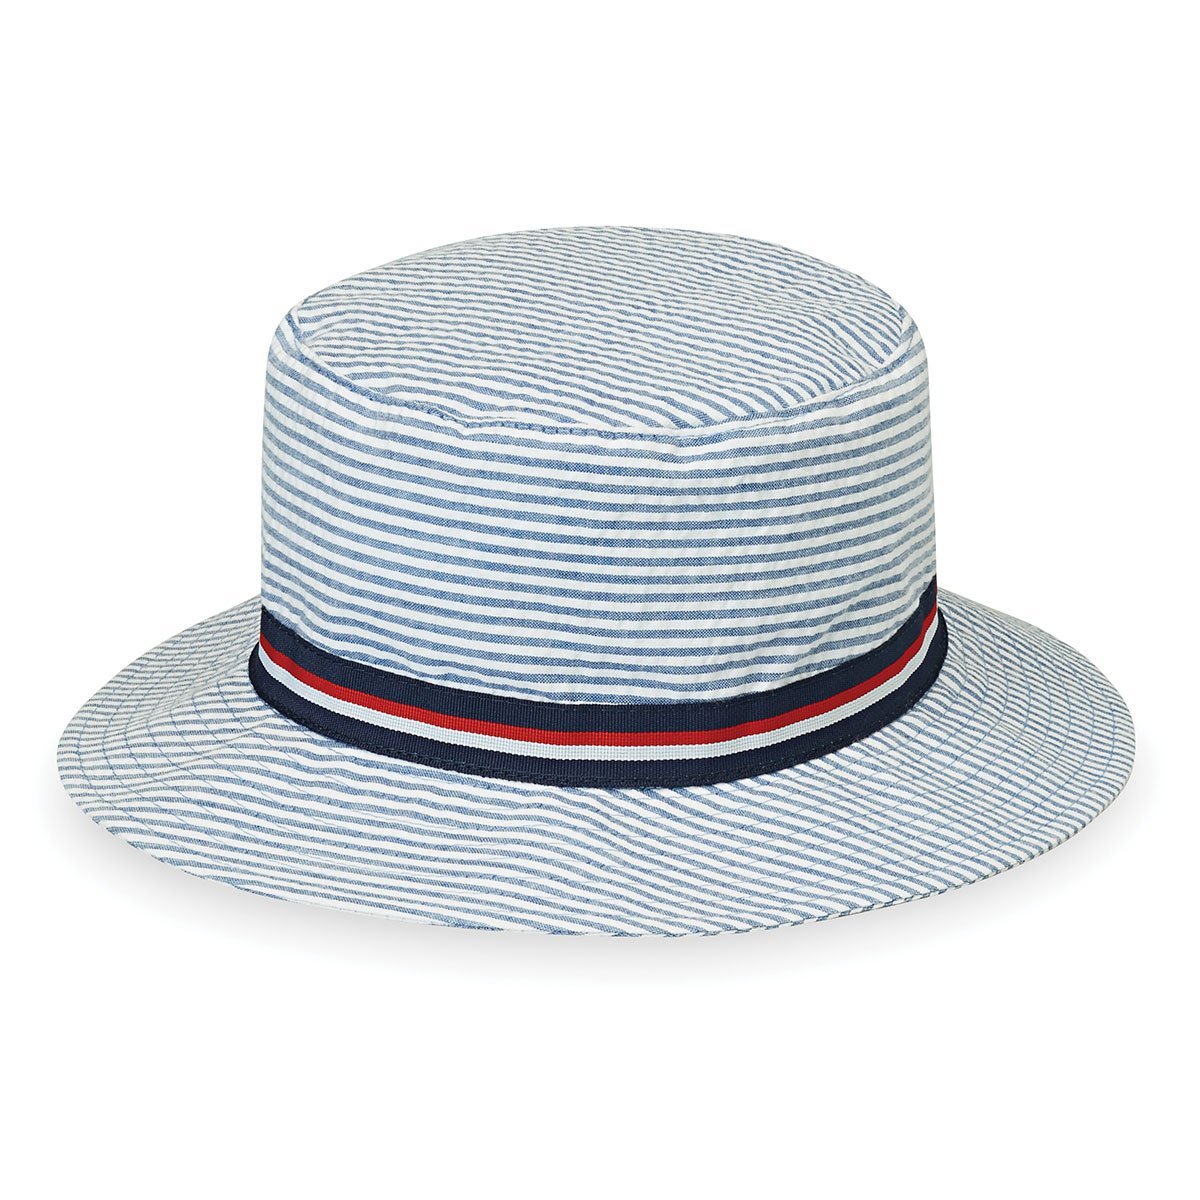 Featuring Front of Kid's Packable Bucket Style Sawyer Cotton UPF Sun Hat in Blue Stripes from Wallaroo